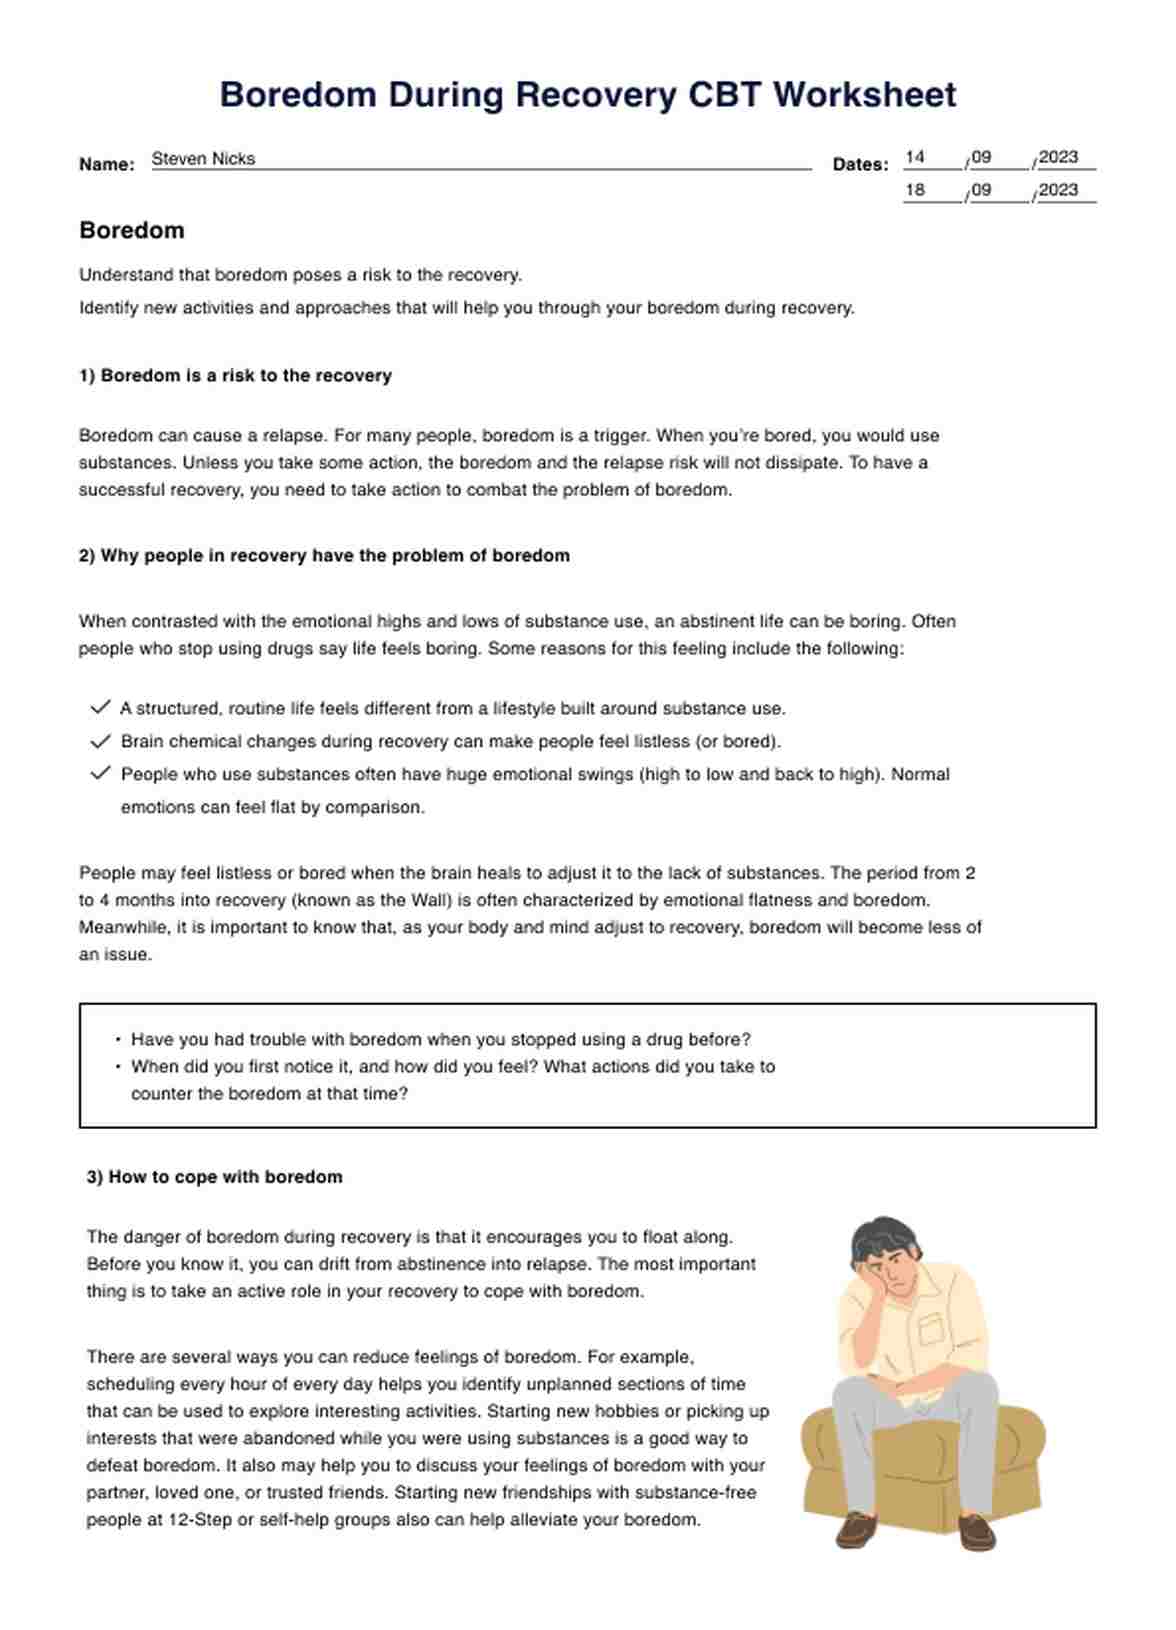 Boredom During Recovery CBT Worksheet PDF Example